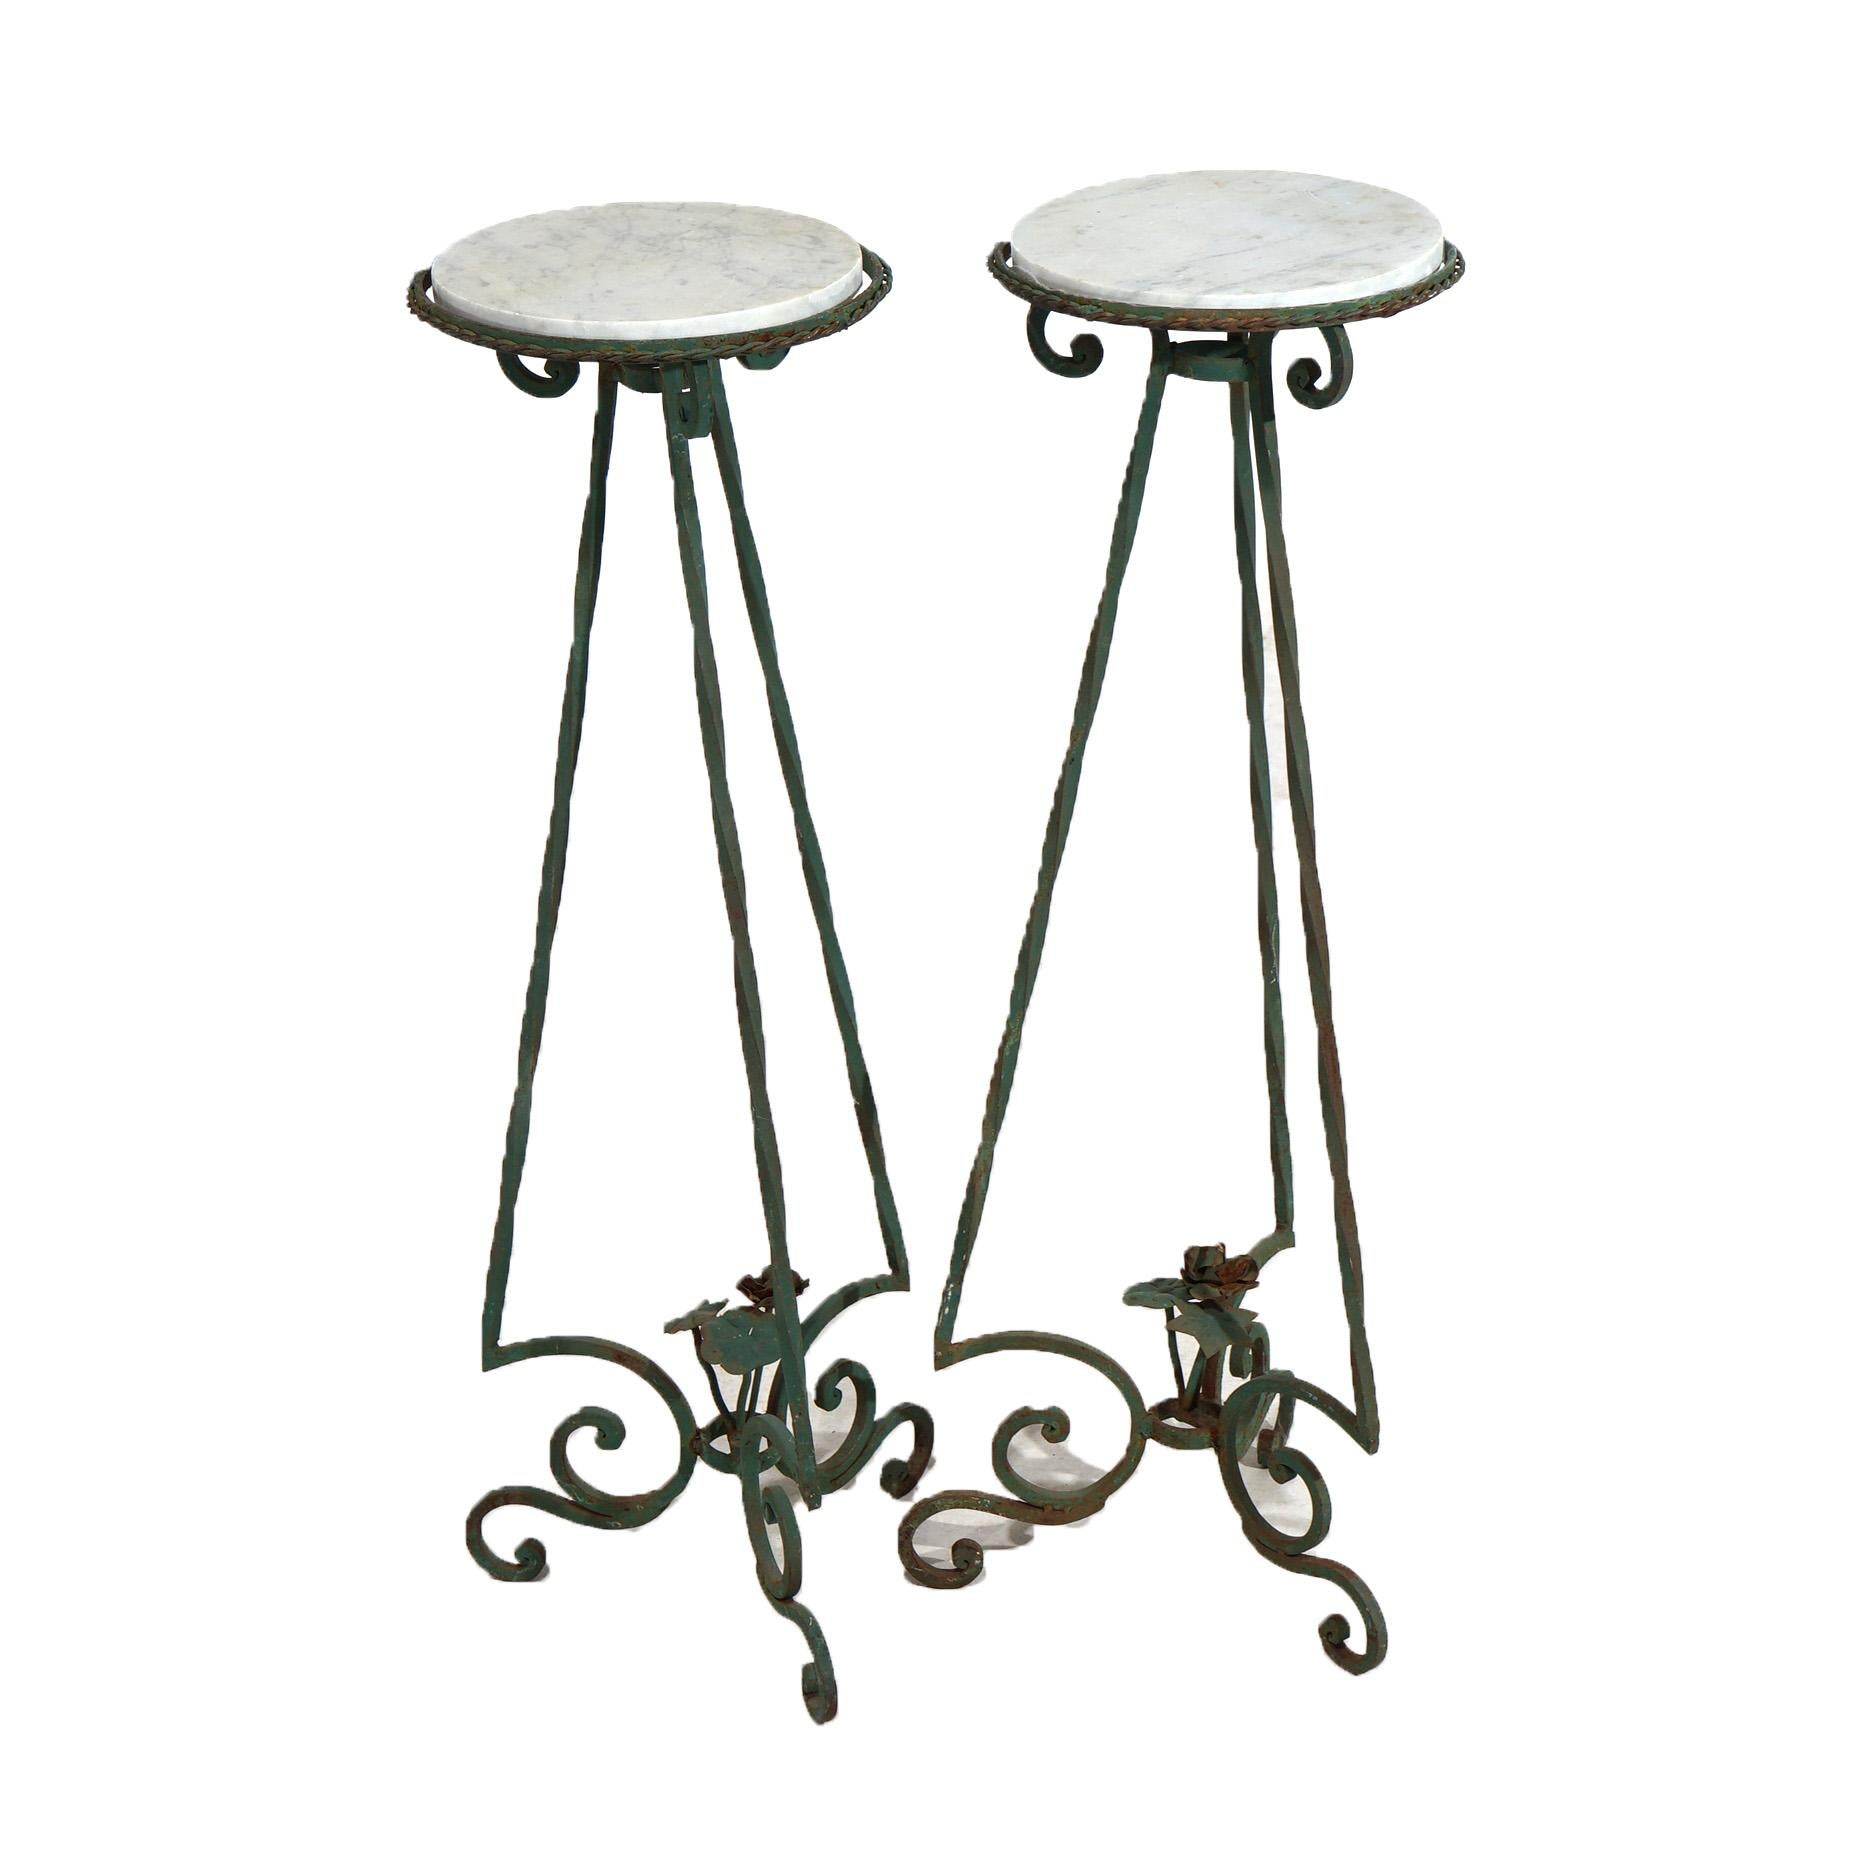 An antique pair of plant stands in the manner of Oscar Bach offer circular marble displays over wrought iron base having three stylized scroll form legs, c1920

Measures- 41.25''H x 15.5''W x 15.5''D